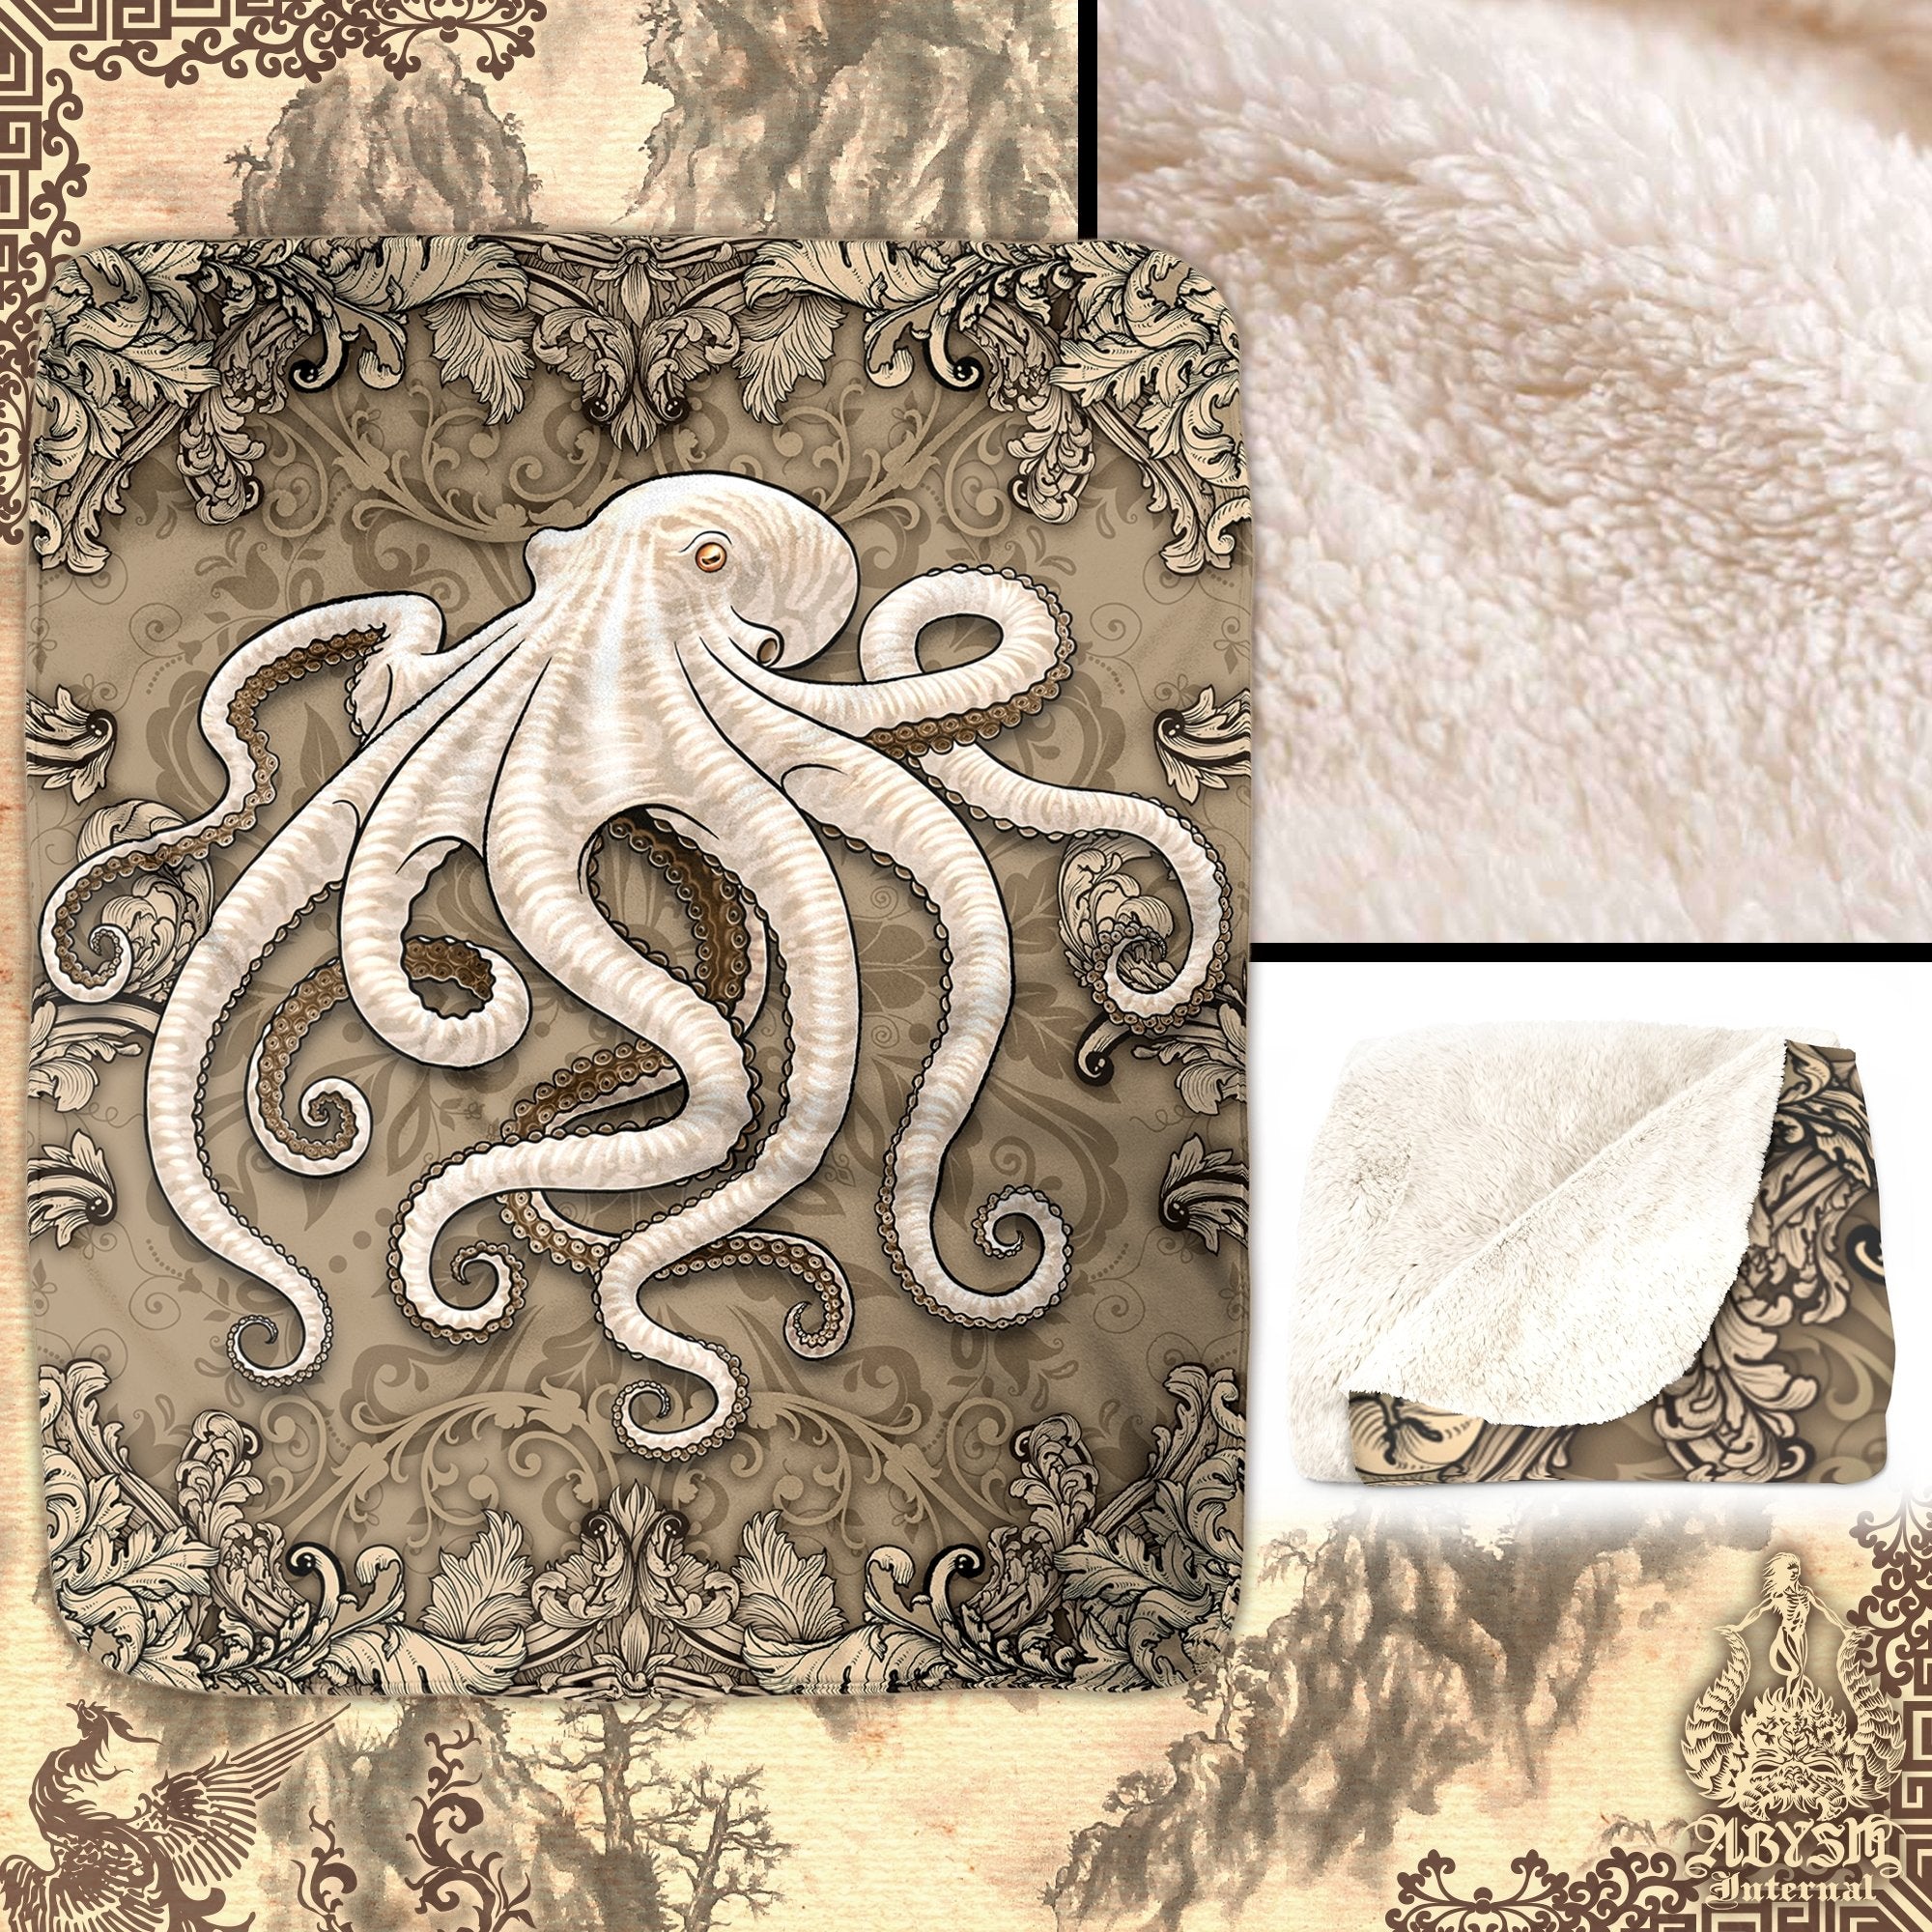 Octopus Throw Fleece Blanket, Indie Gift, Coastal Home Decor, Eclectic and Funky Gift - Cream - Abysm Internal